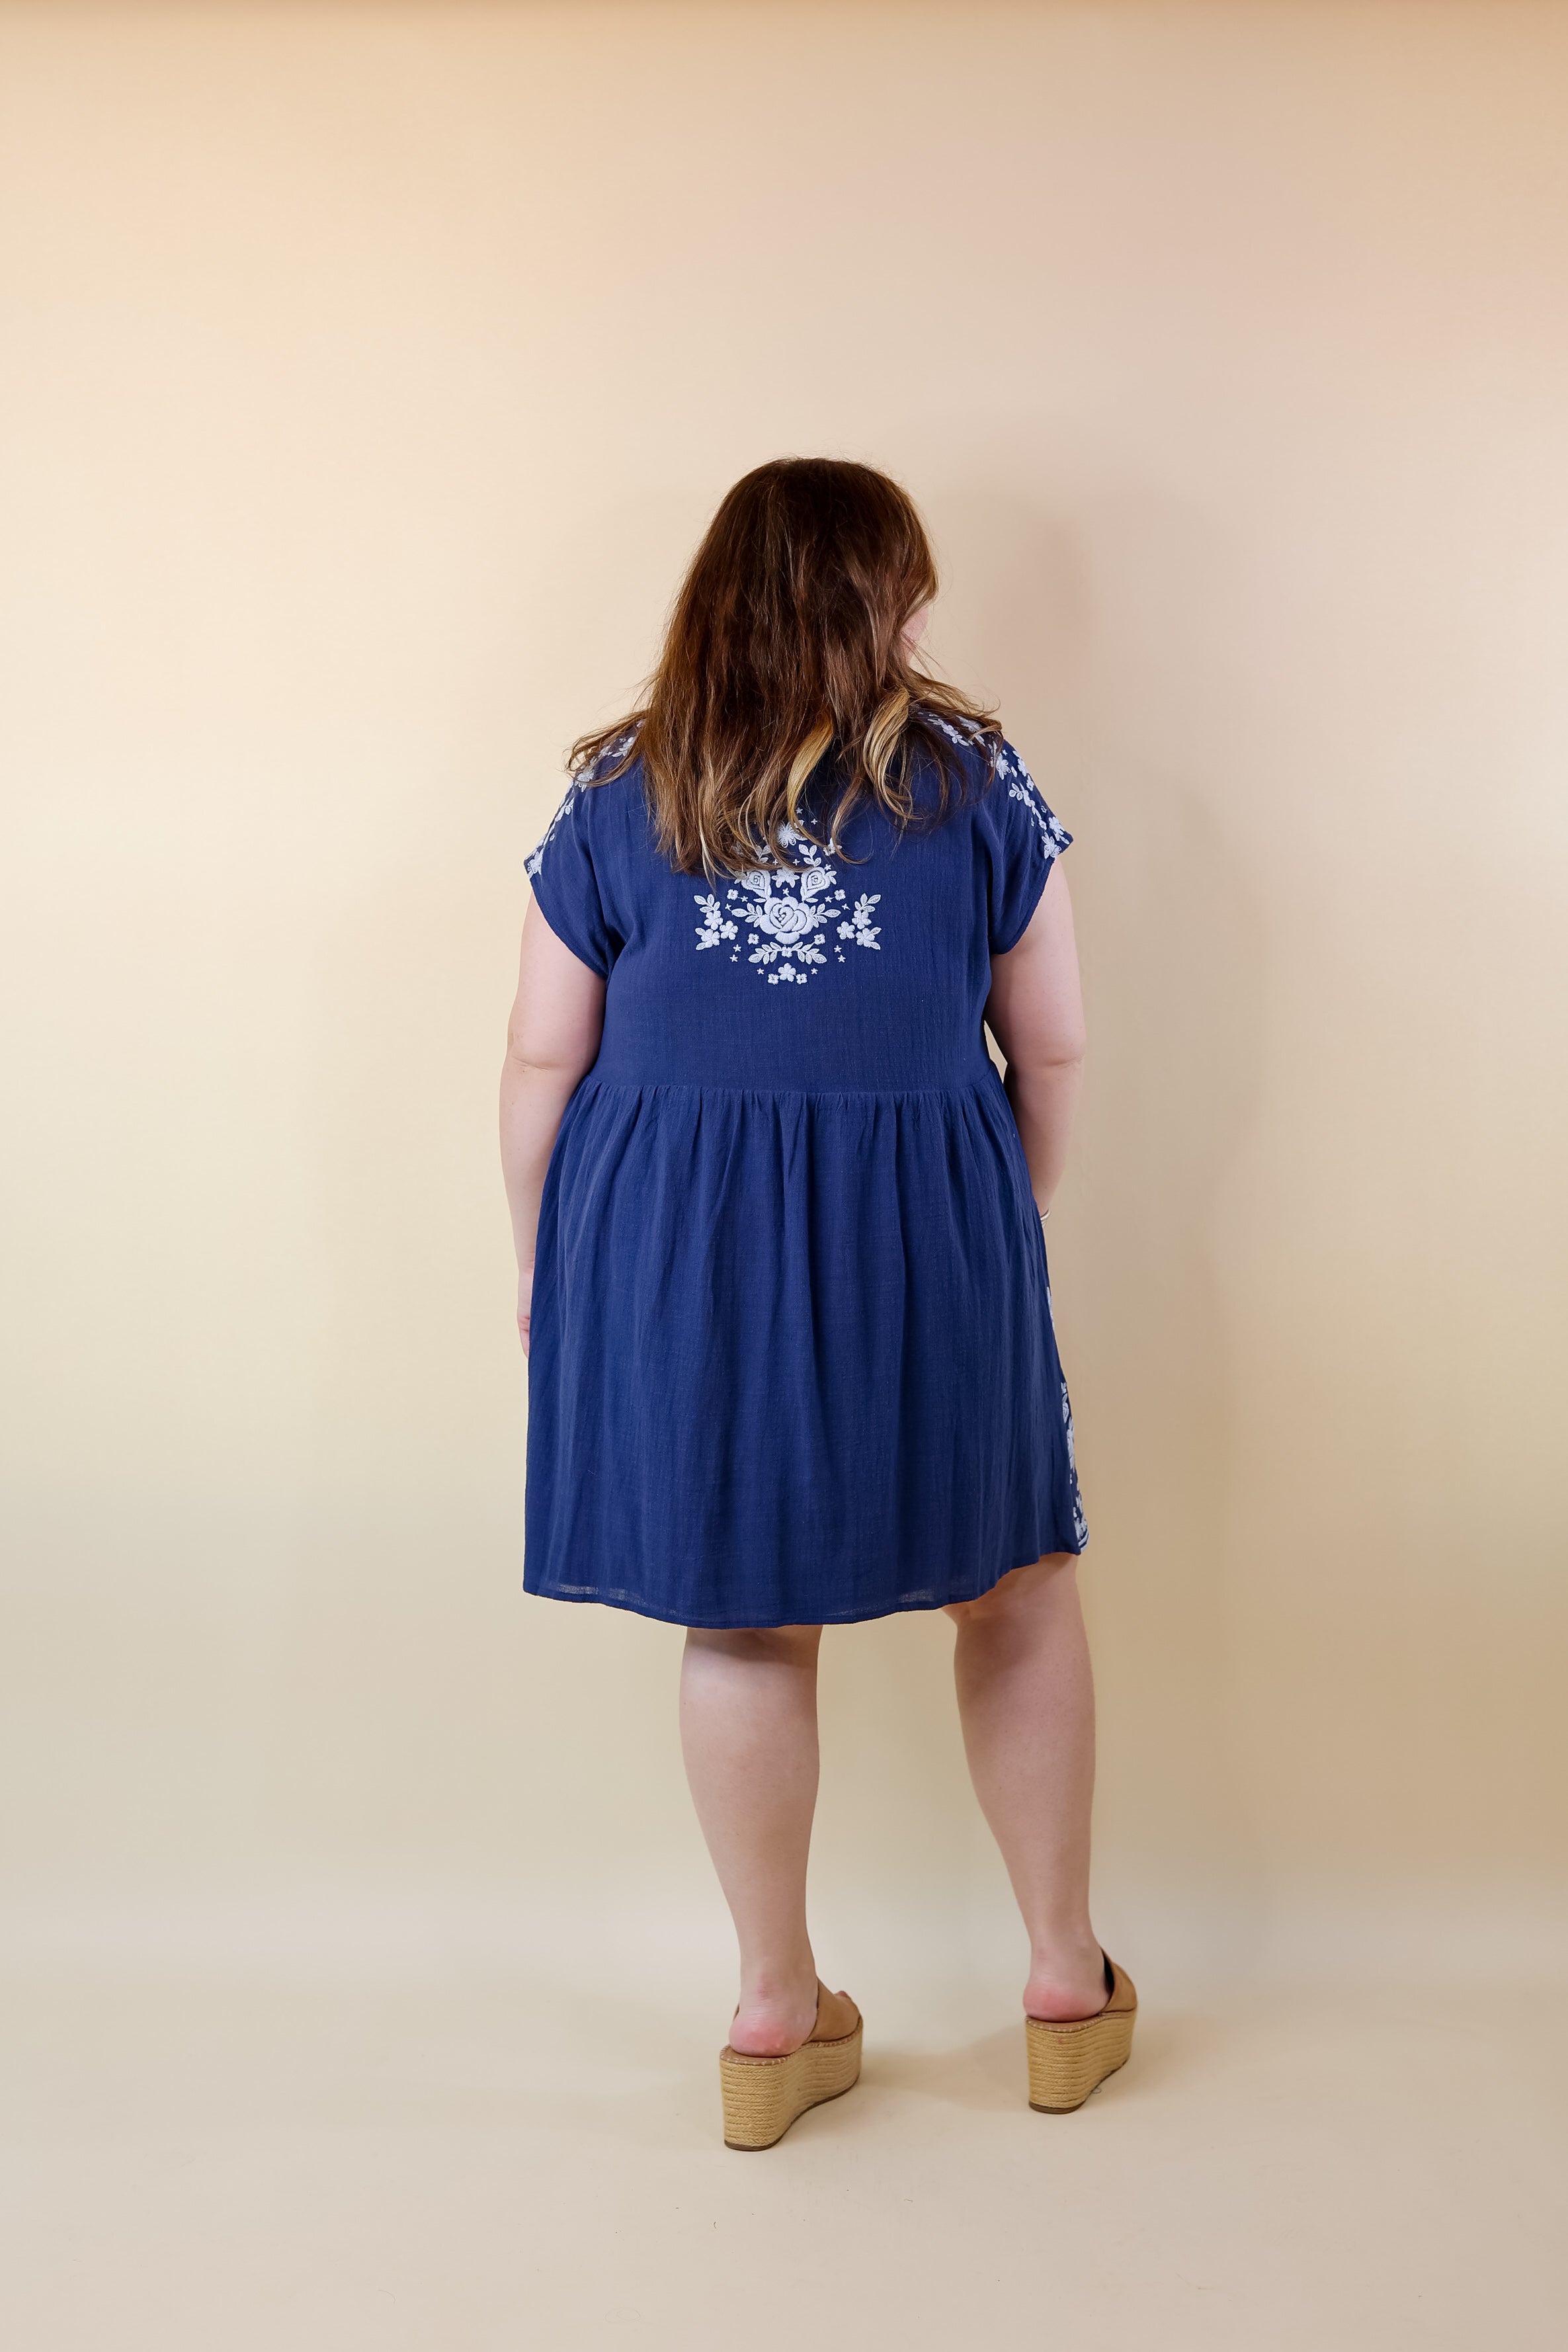 Nautical Blooms Quarter Button and Collar Embroidered Dress with Cap Sleeves in Navy Blue - Giddy Up Glamour Boutique